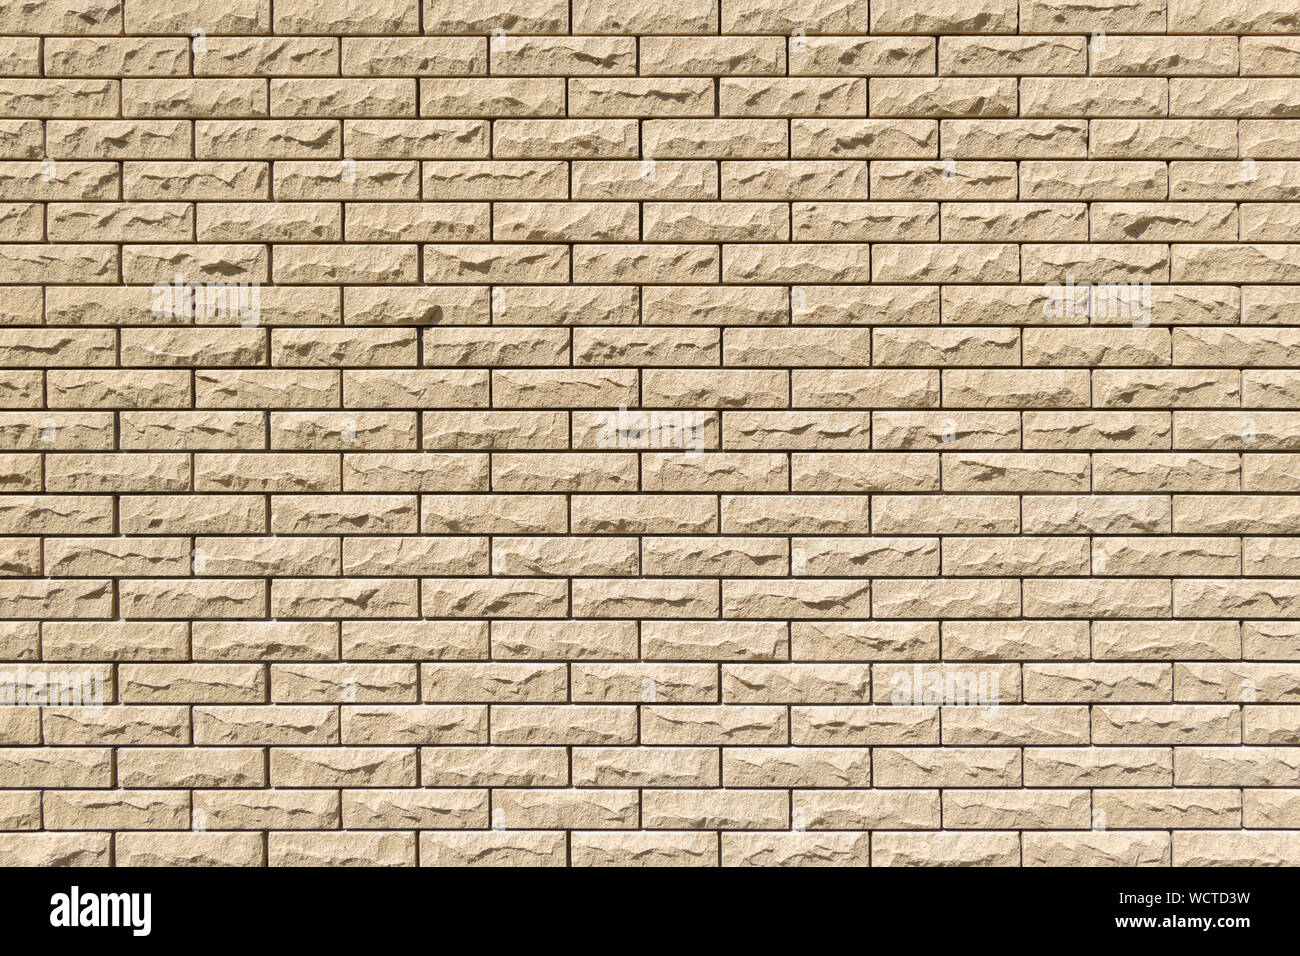 Close-up detail of a sand brick wall texture for background. Horizontal masonry. Copy space. Beautiful decorative bricks with rellief surface. Vertica Stock Photo